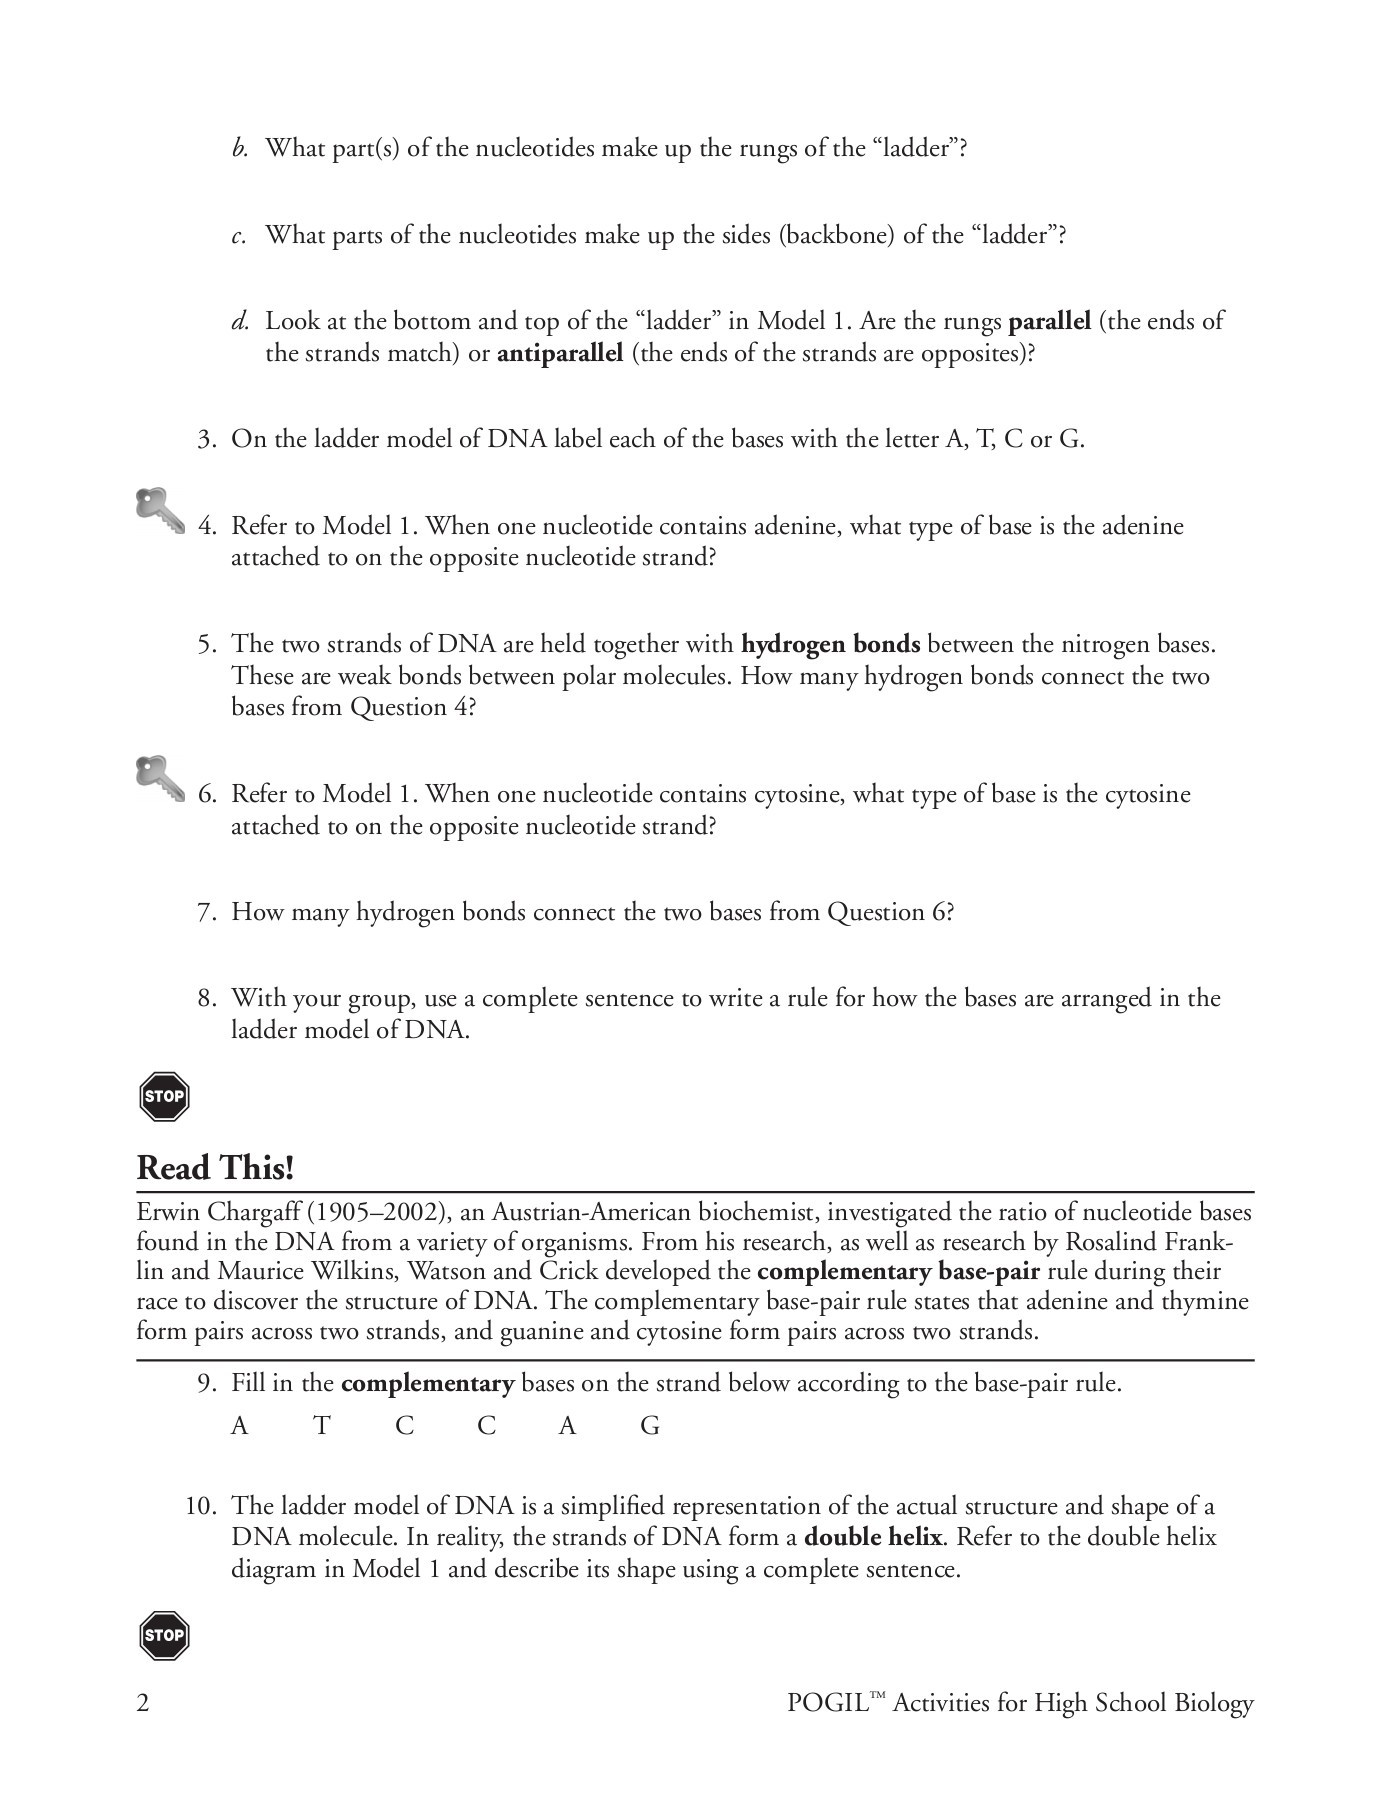 Dna Structure and Replication Worksheet Dna Structure and Replication Pages 1 5 Text Version